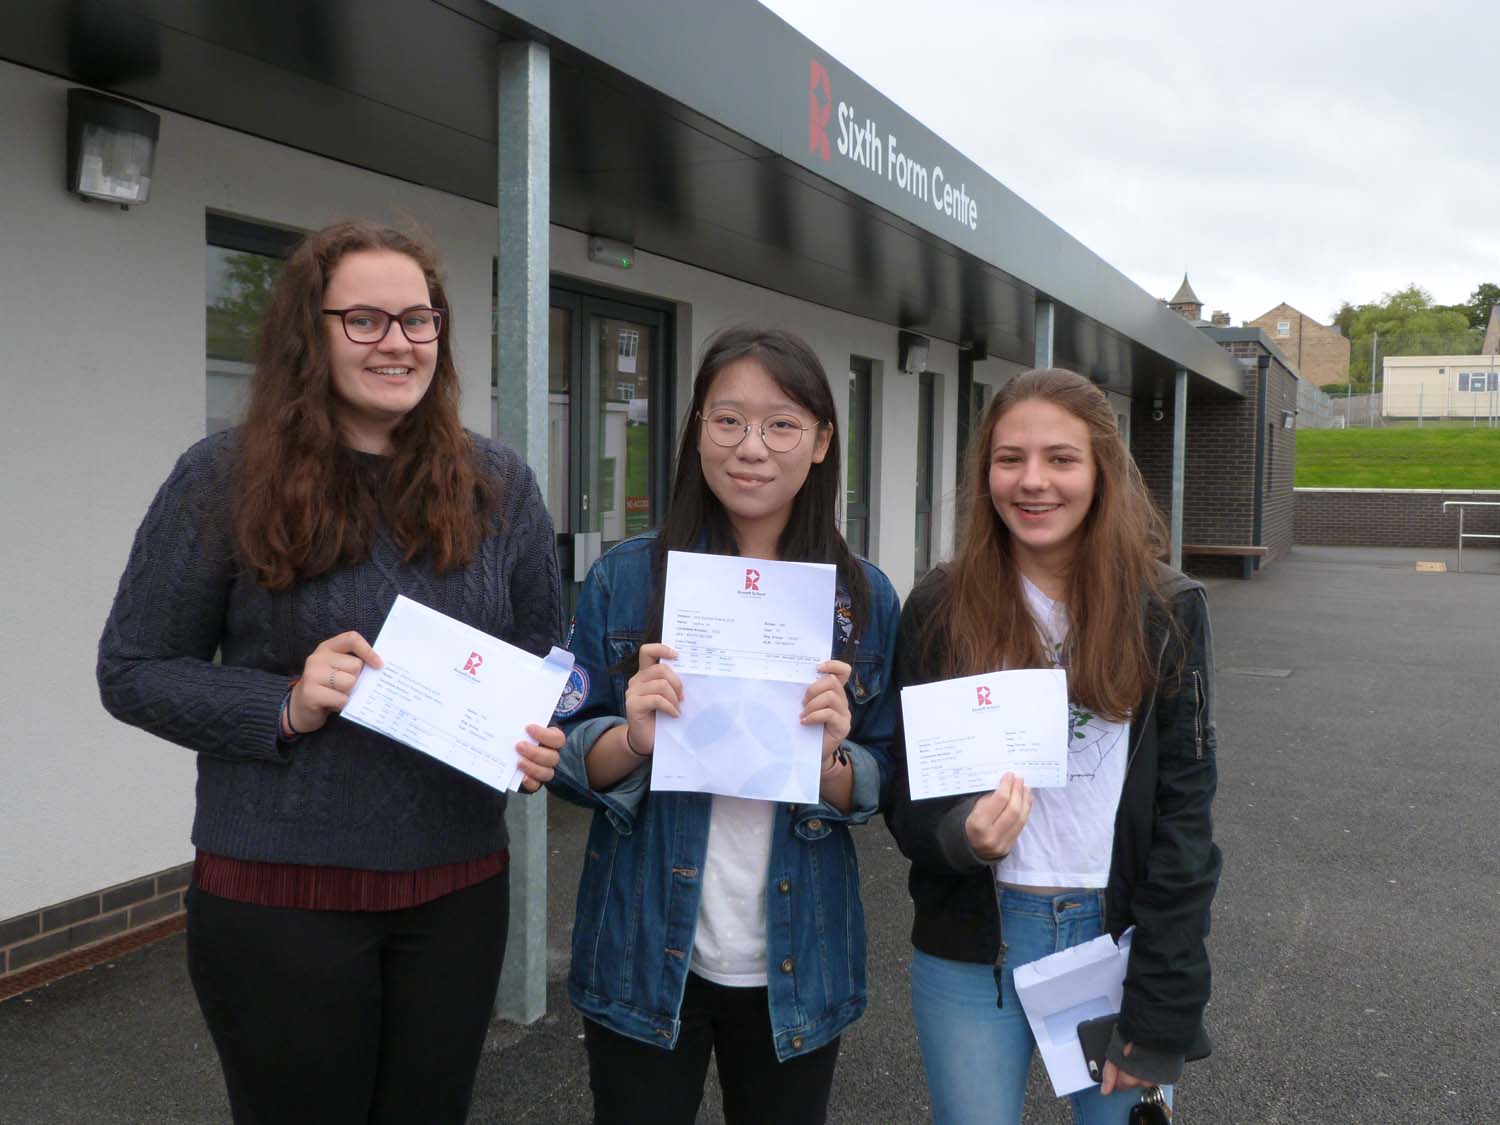 Beth Higlett (ABC), Joanne Ho (A*AB) and Anna Robbins (ACE) achieved the results they needed for their first choice university courses. Beth will study Philosophy at Sheffield, Joanne begins her career as a vet at the Royal Veterinary College, and Anna will study animation at Northumbria